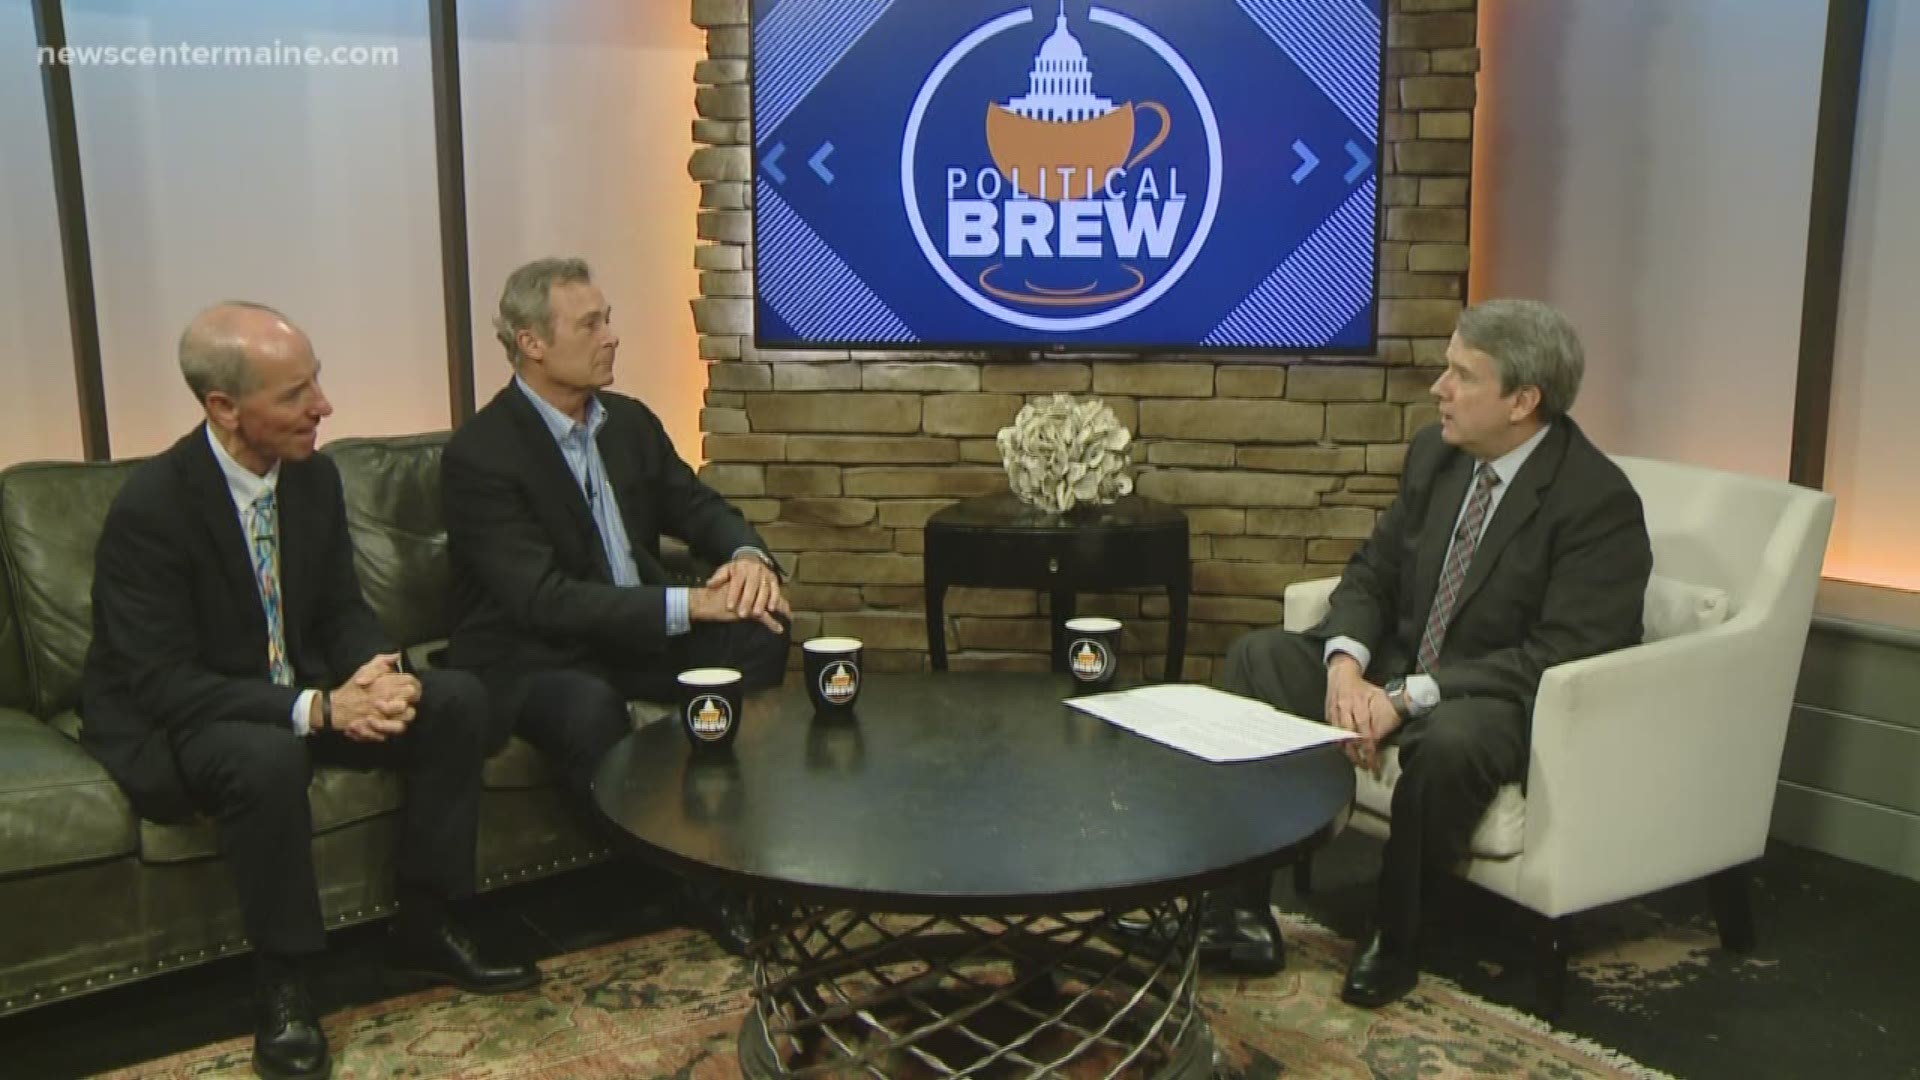 Former Republican Sen. Phil Harriman is joined this week by a one-time State House colleague, former Democratic Sen. Jerry Conley, Jr., who is subbing for John Richardson this week on NEWS CENTER Maine's Political Brew